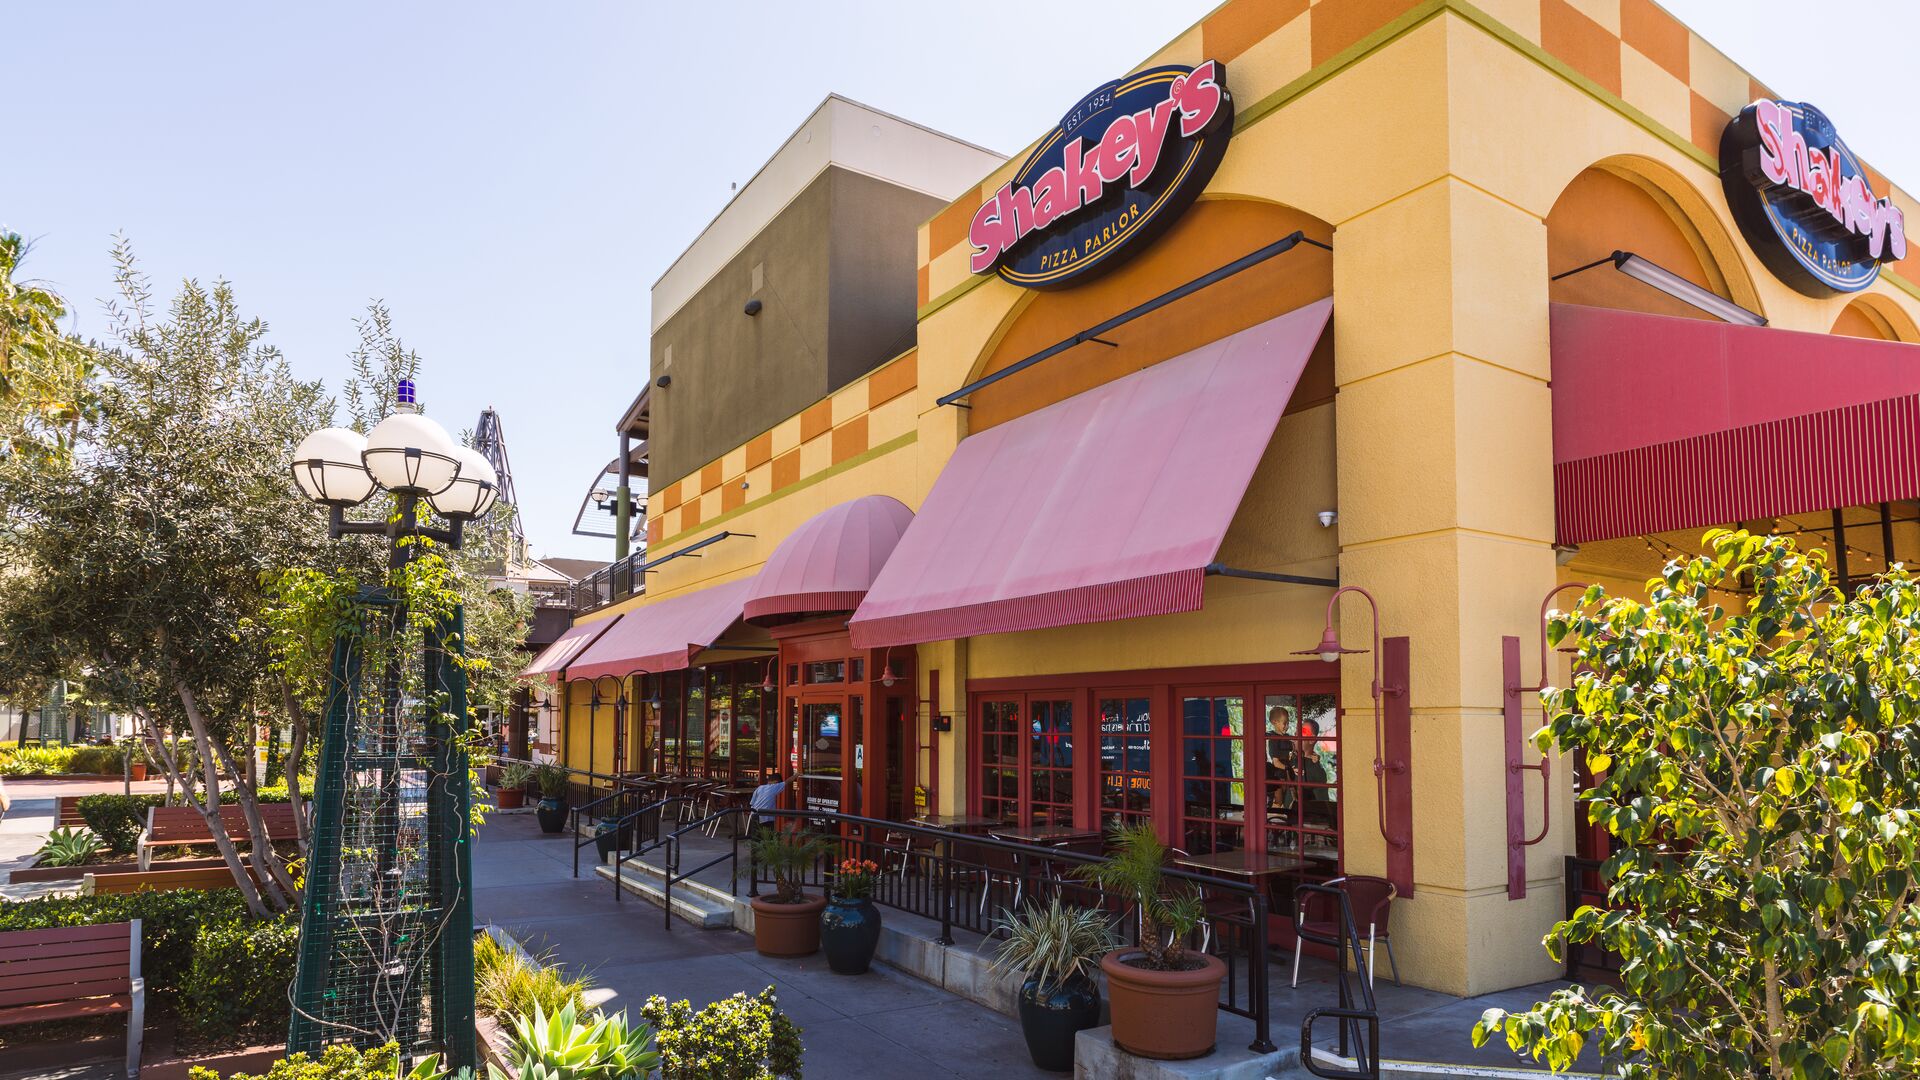 View of Chula Vista restaurant and outdoor seating